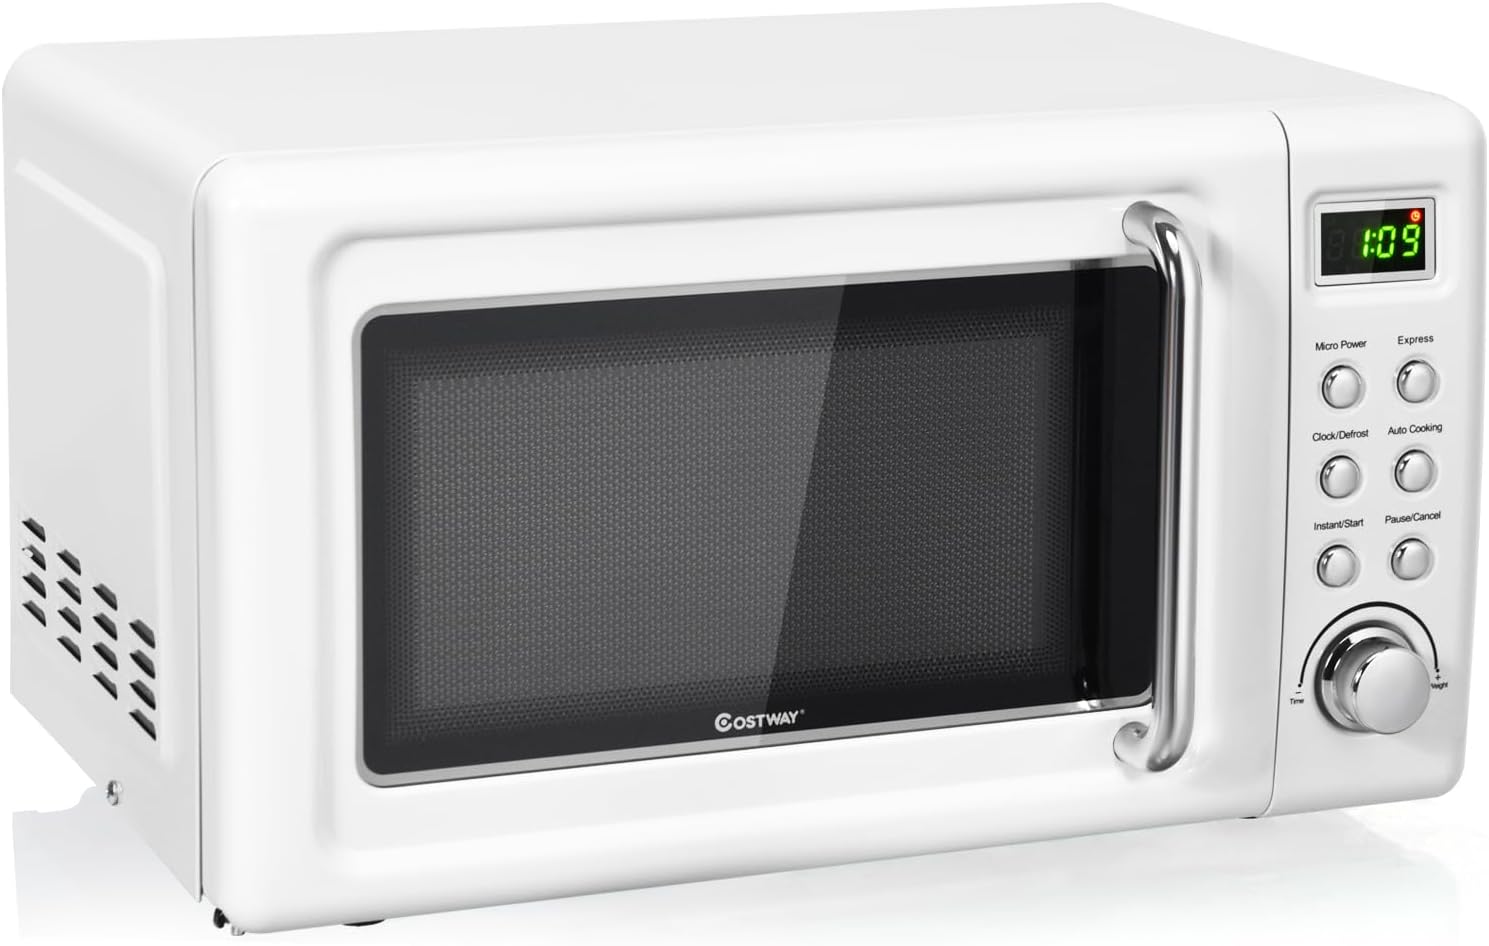 I highly recommend this microwave. It doesnt take a lot of space and the perfect size. Not only that, the color is beautiful and looks exactly like the photos provided. The instructions were clear and everything is so easy to use. This microwave is really impressive, it was able to heat up my food really fast compared to the previous microwaves Ive had.